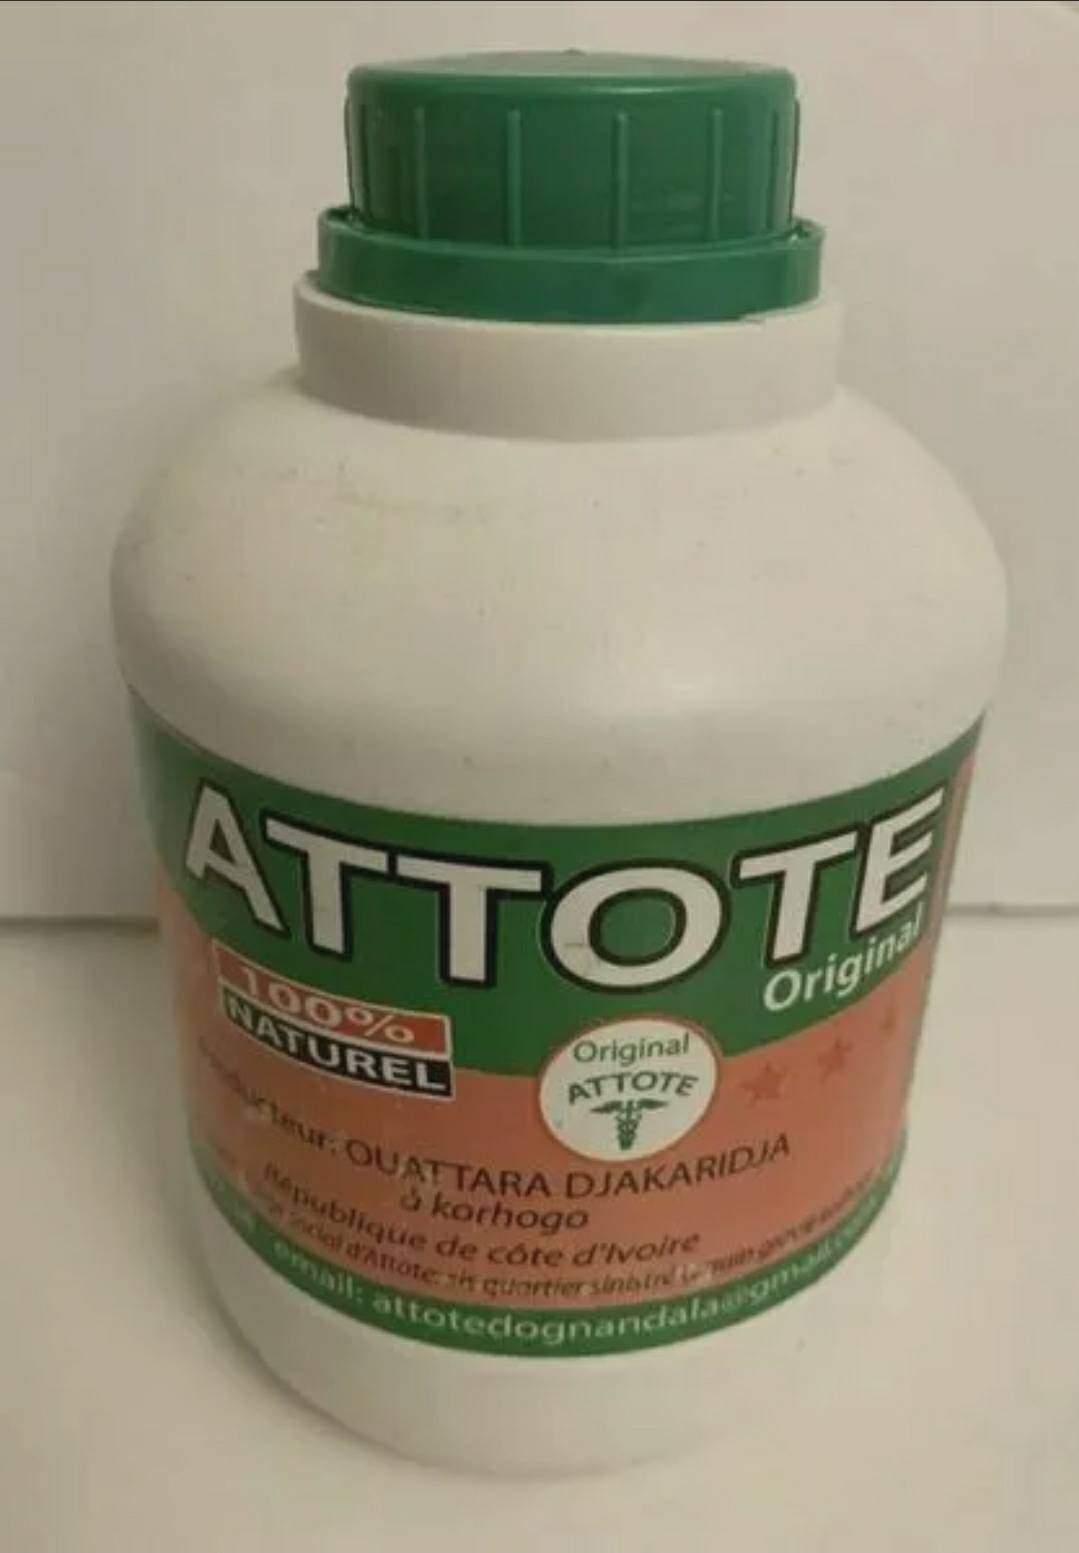 2 Bottles of All Natural Attote Herbal Mixture for Man Power -  Israel